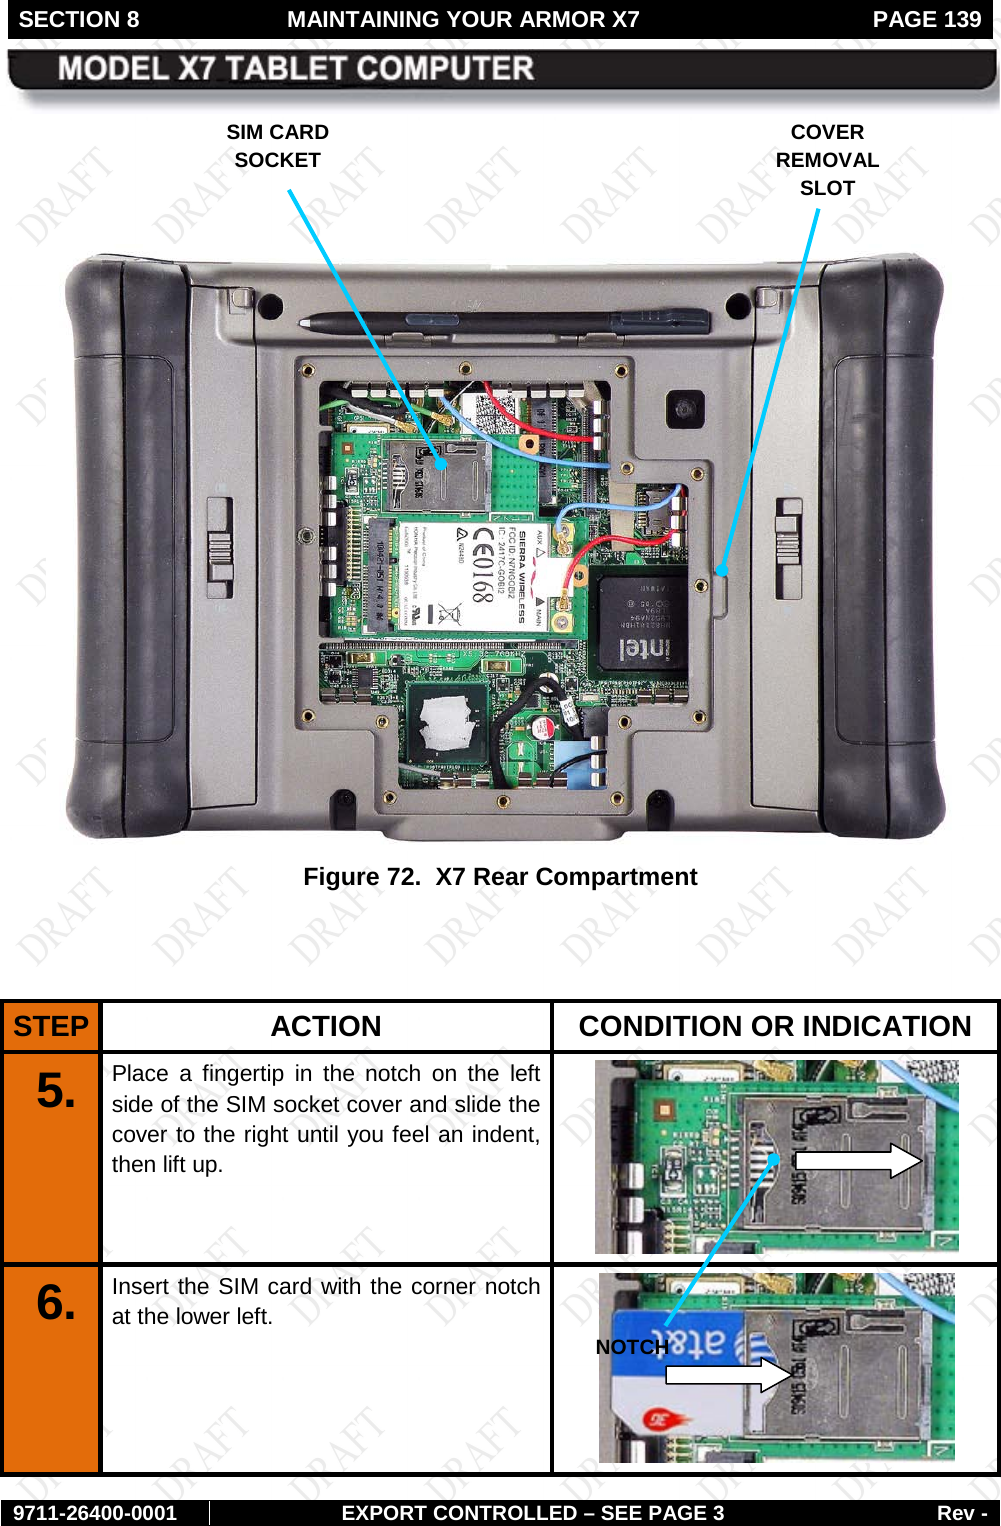 SECTION 8 MAINTAINING YOUR ARMOR X7  PAGE 139        9711-26400-0001 EXPORT CONTROLLED – SEE PAGE 3 Rev -     Figure 72.  X7 Rear Compartment   STEP  ACTION CONDITION OR INDICATION 5.  Place a fingertip in the notch on the left side of the SIM socket cover and slide the cover to the right until you feel an indent, then lift up.  6.  Insert the SIM card with the corner notch at the lower left.  SIM CARD SOCKET COVER REMOVAL SLOT NOTCH 